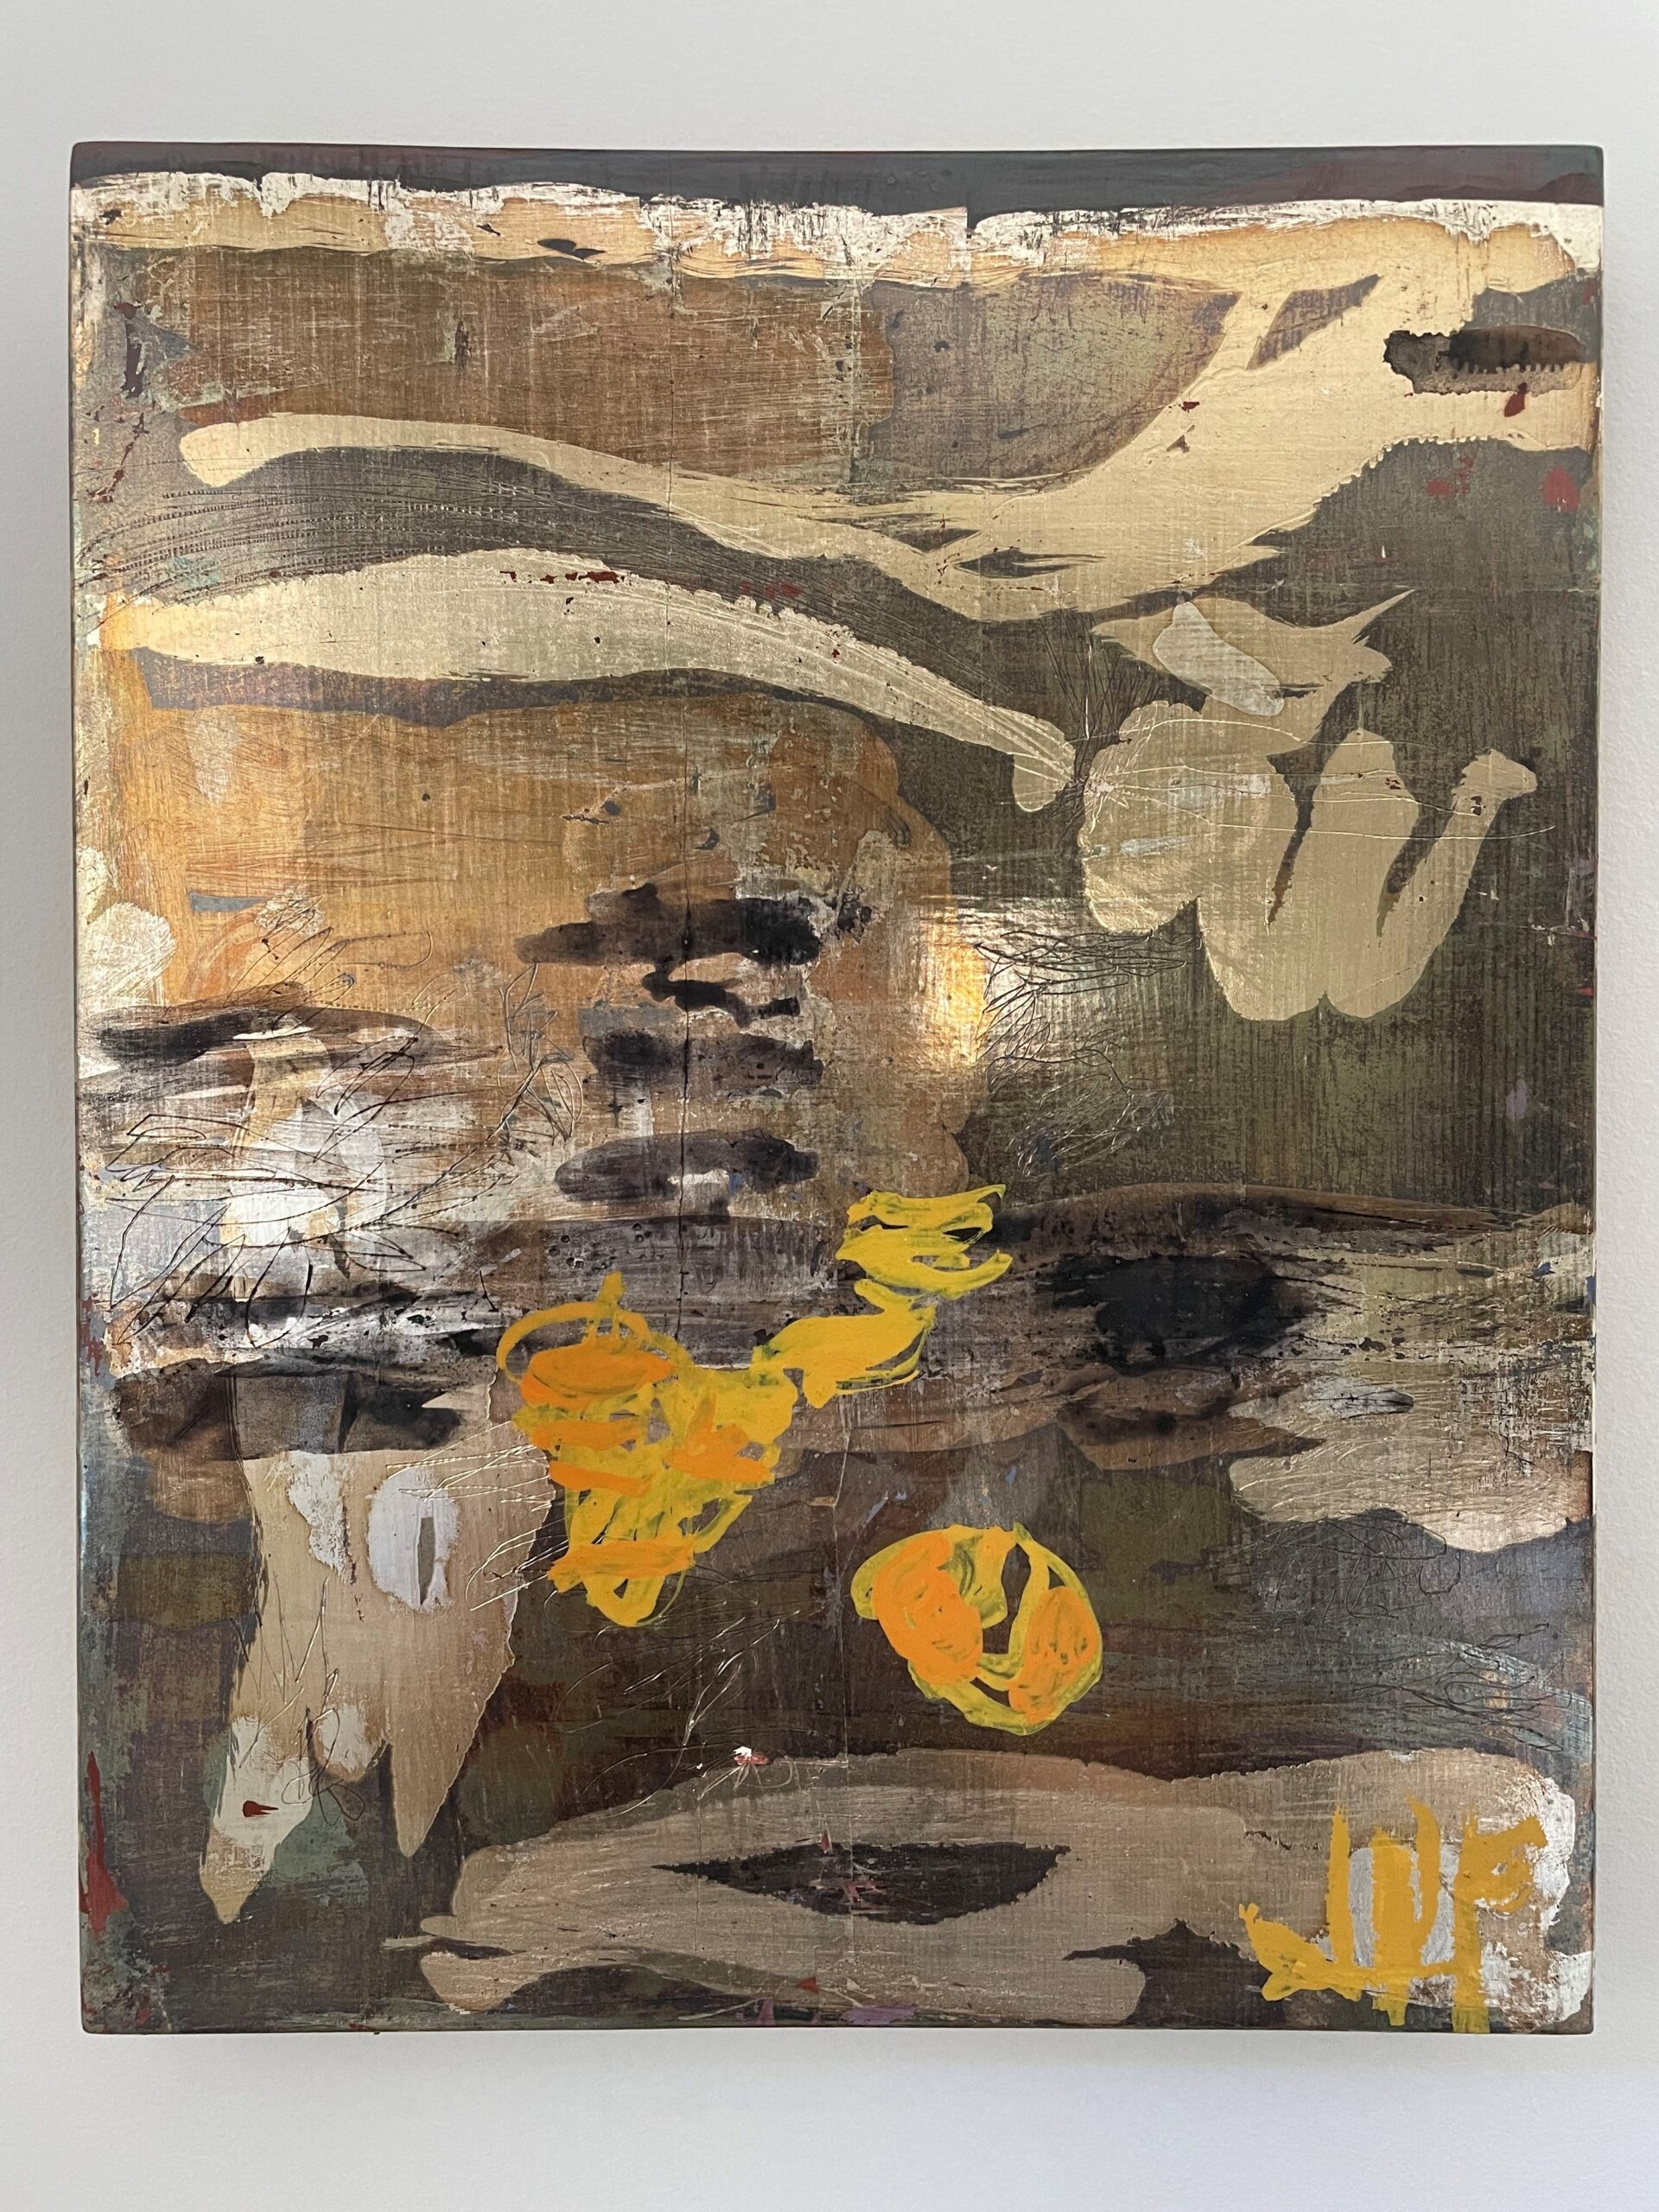 Water gilded panel painting, gesso on wood, silver leaf, oxidation, time is passing, sgraffito, wood grain, bole, clay, burnish, shellac, oak gall ink, punch work, handmade egg tempera, mixed media, contemporary art, paint making, abstract painting, rub, chatoyancy, reflection